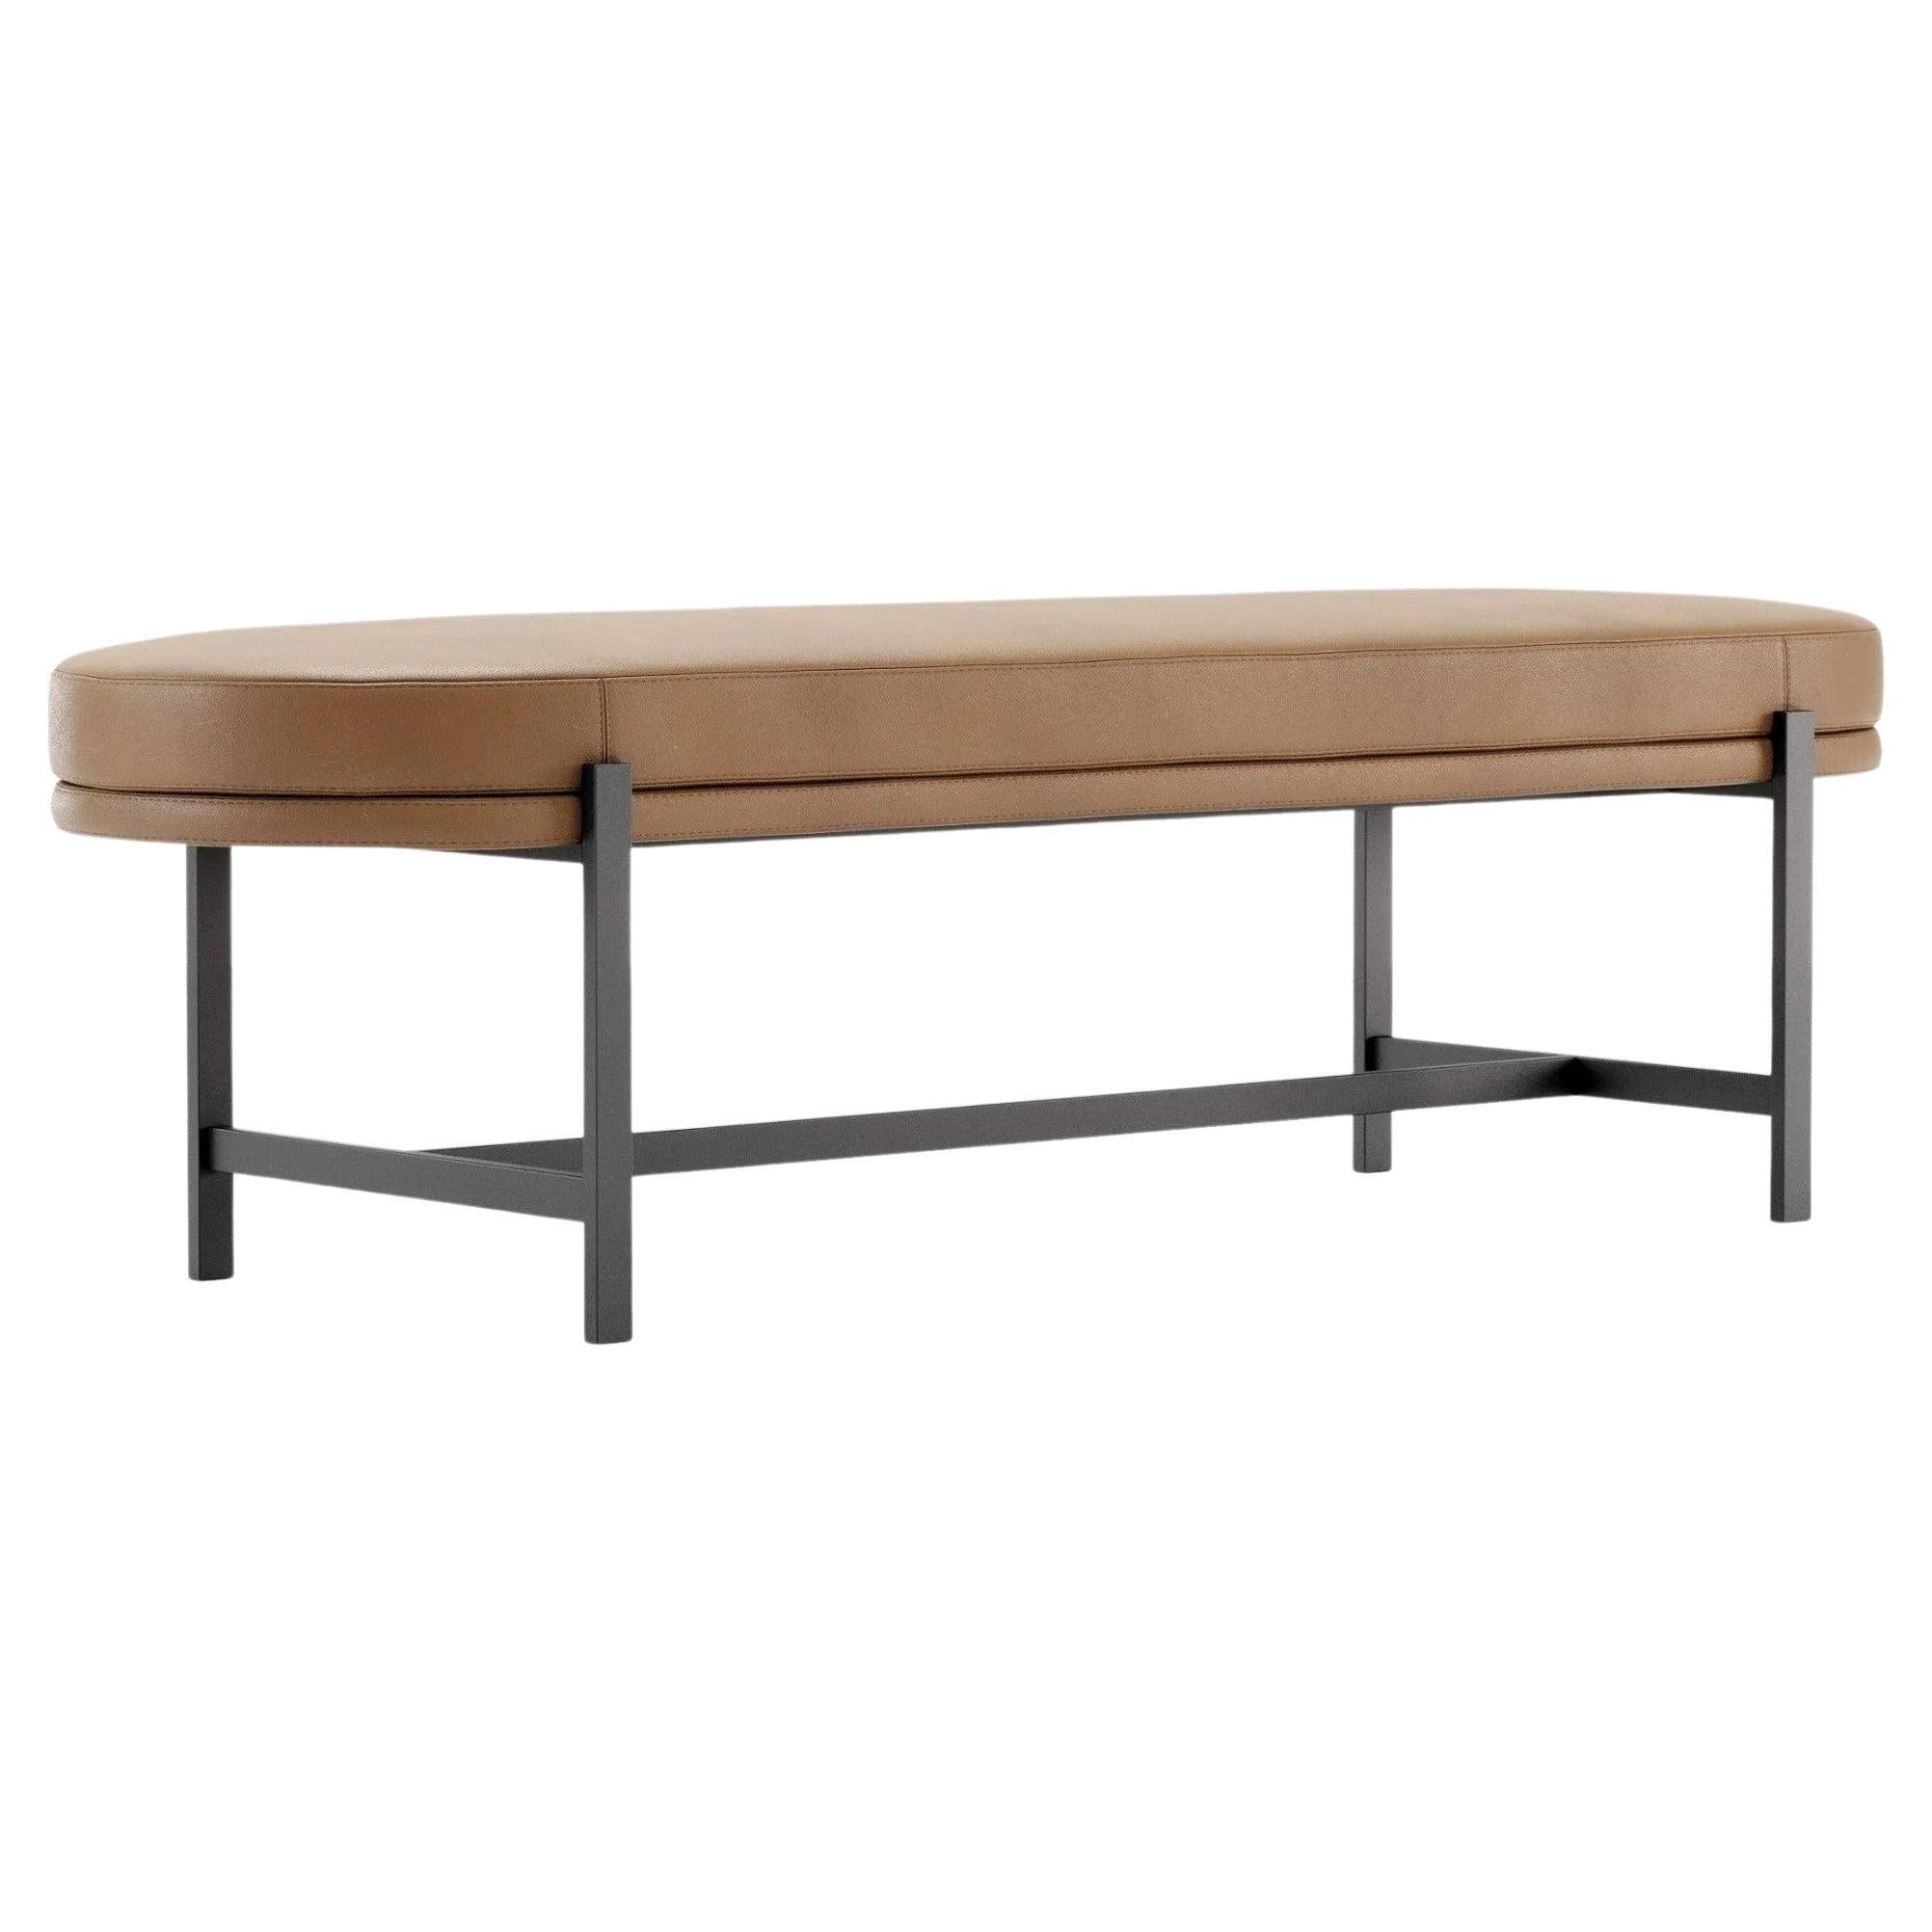 Oval Shape Metal Bench Upholstered in Custom Leather Colors